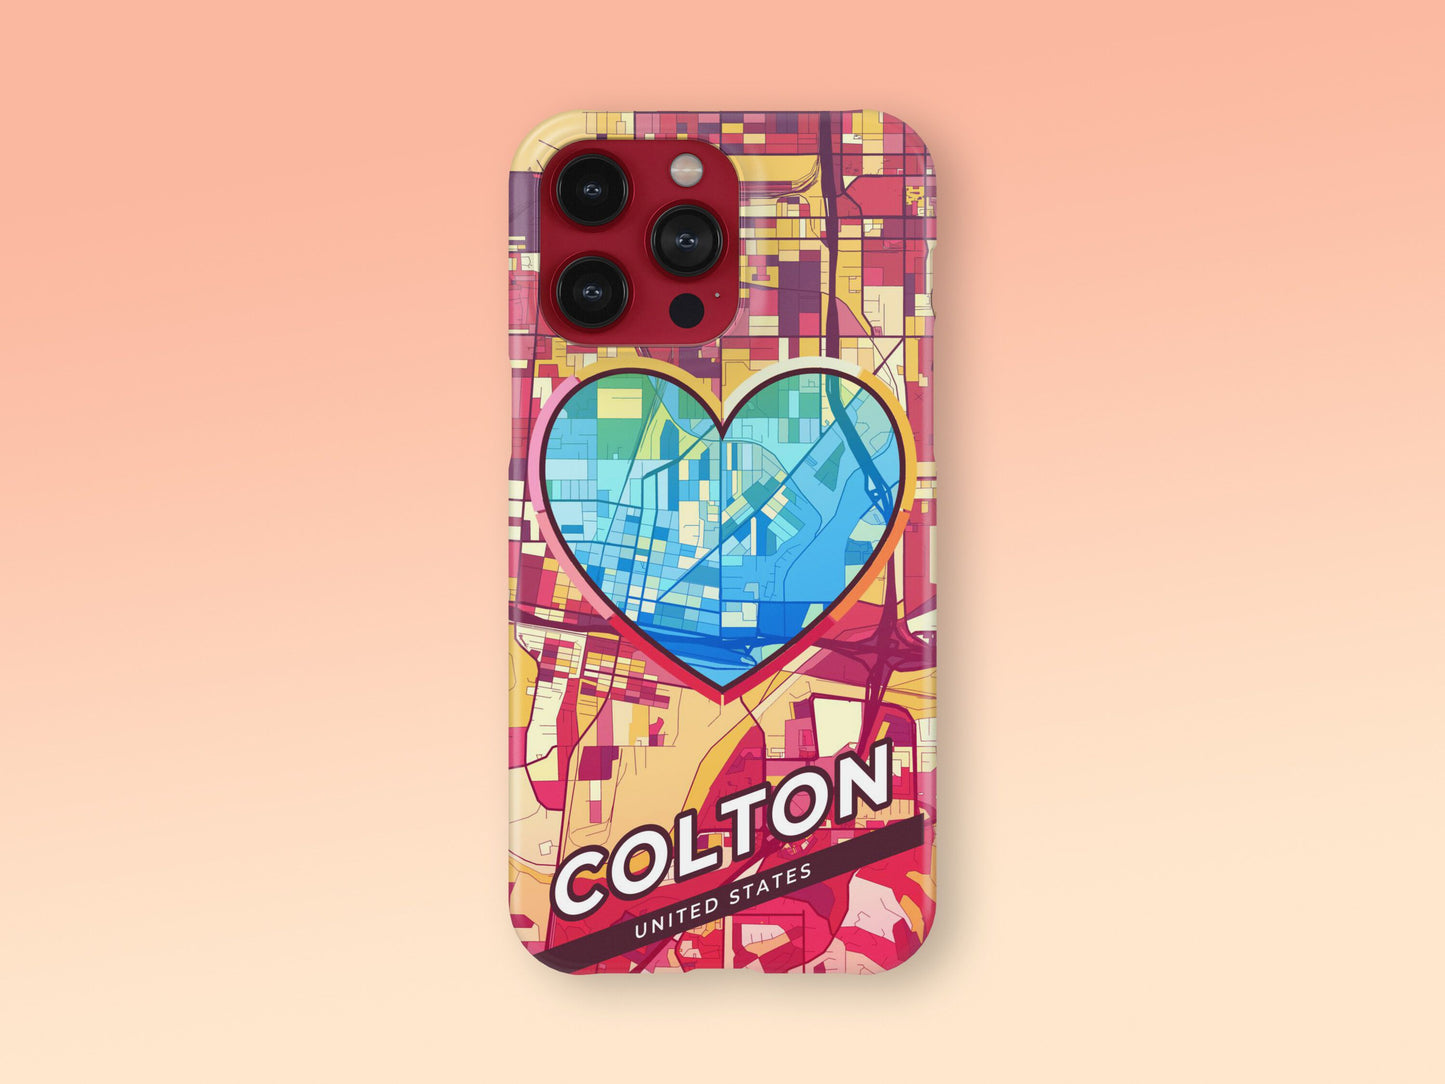 Colton California slim phone case with colorful icon. Birthday, wedding or housewarming gift. Couple match cases. 2